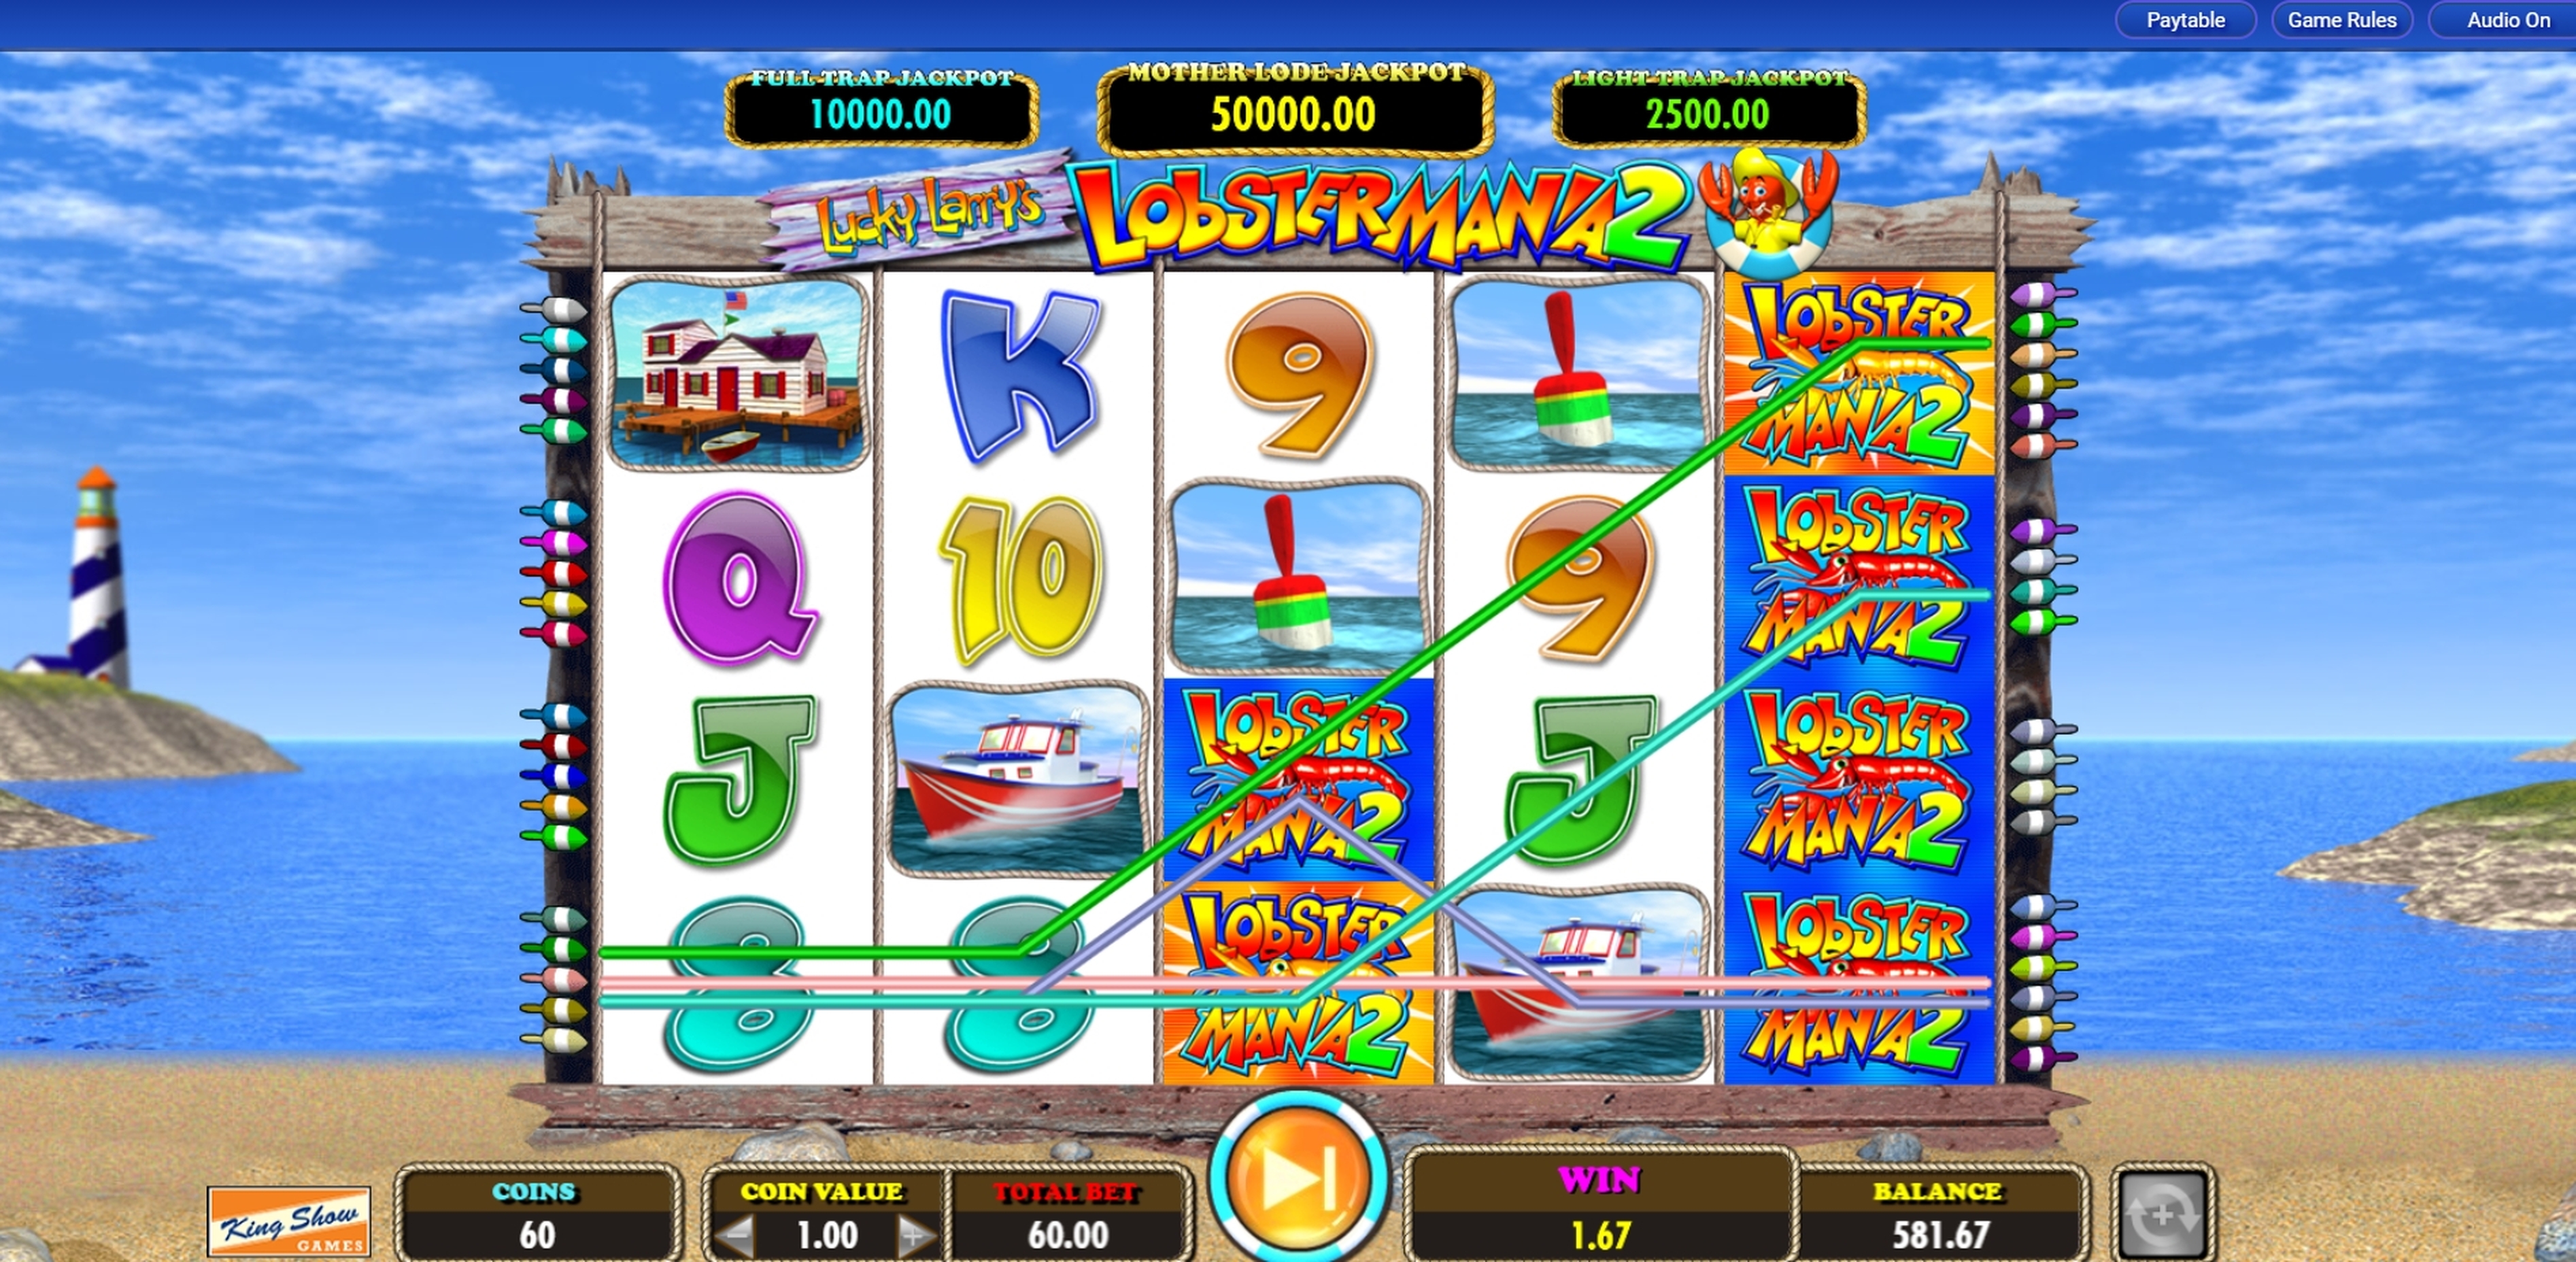 Win Money in Lucky Larry's Lobstermania 2 Free Slot Game by IGT